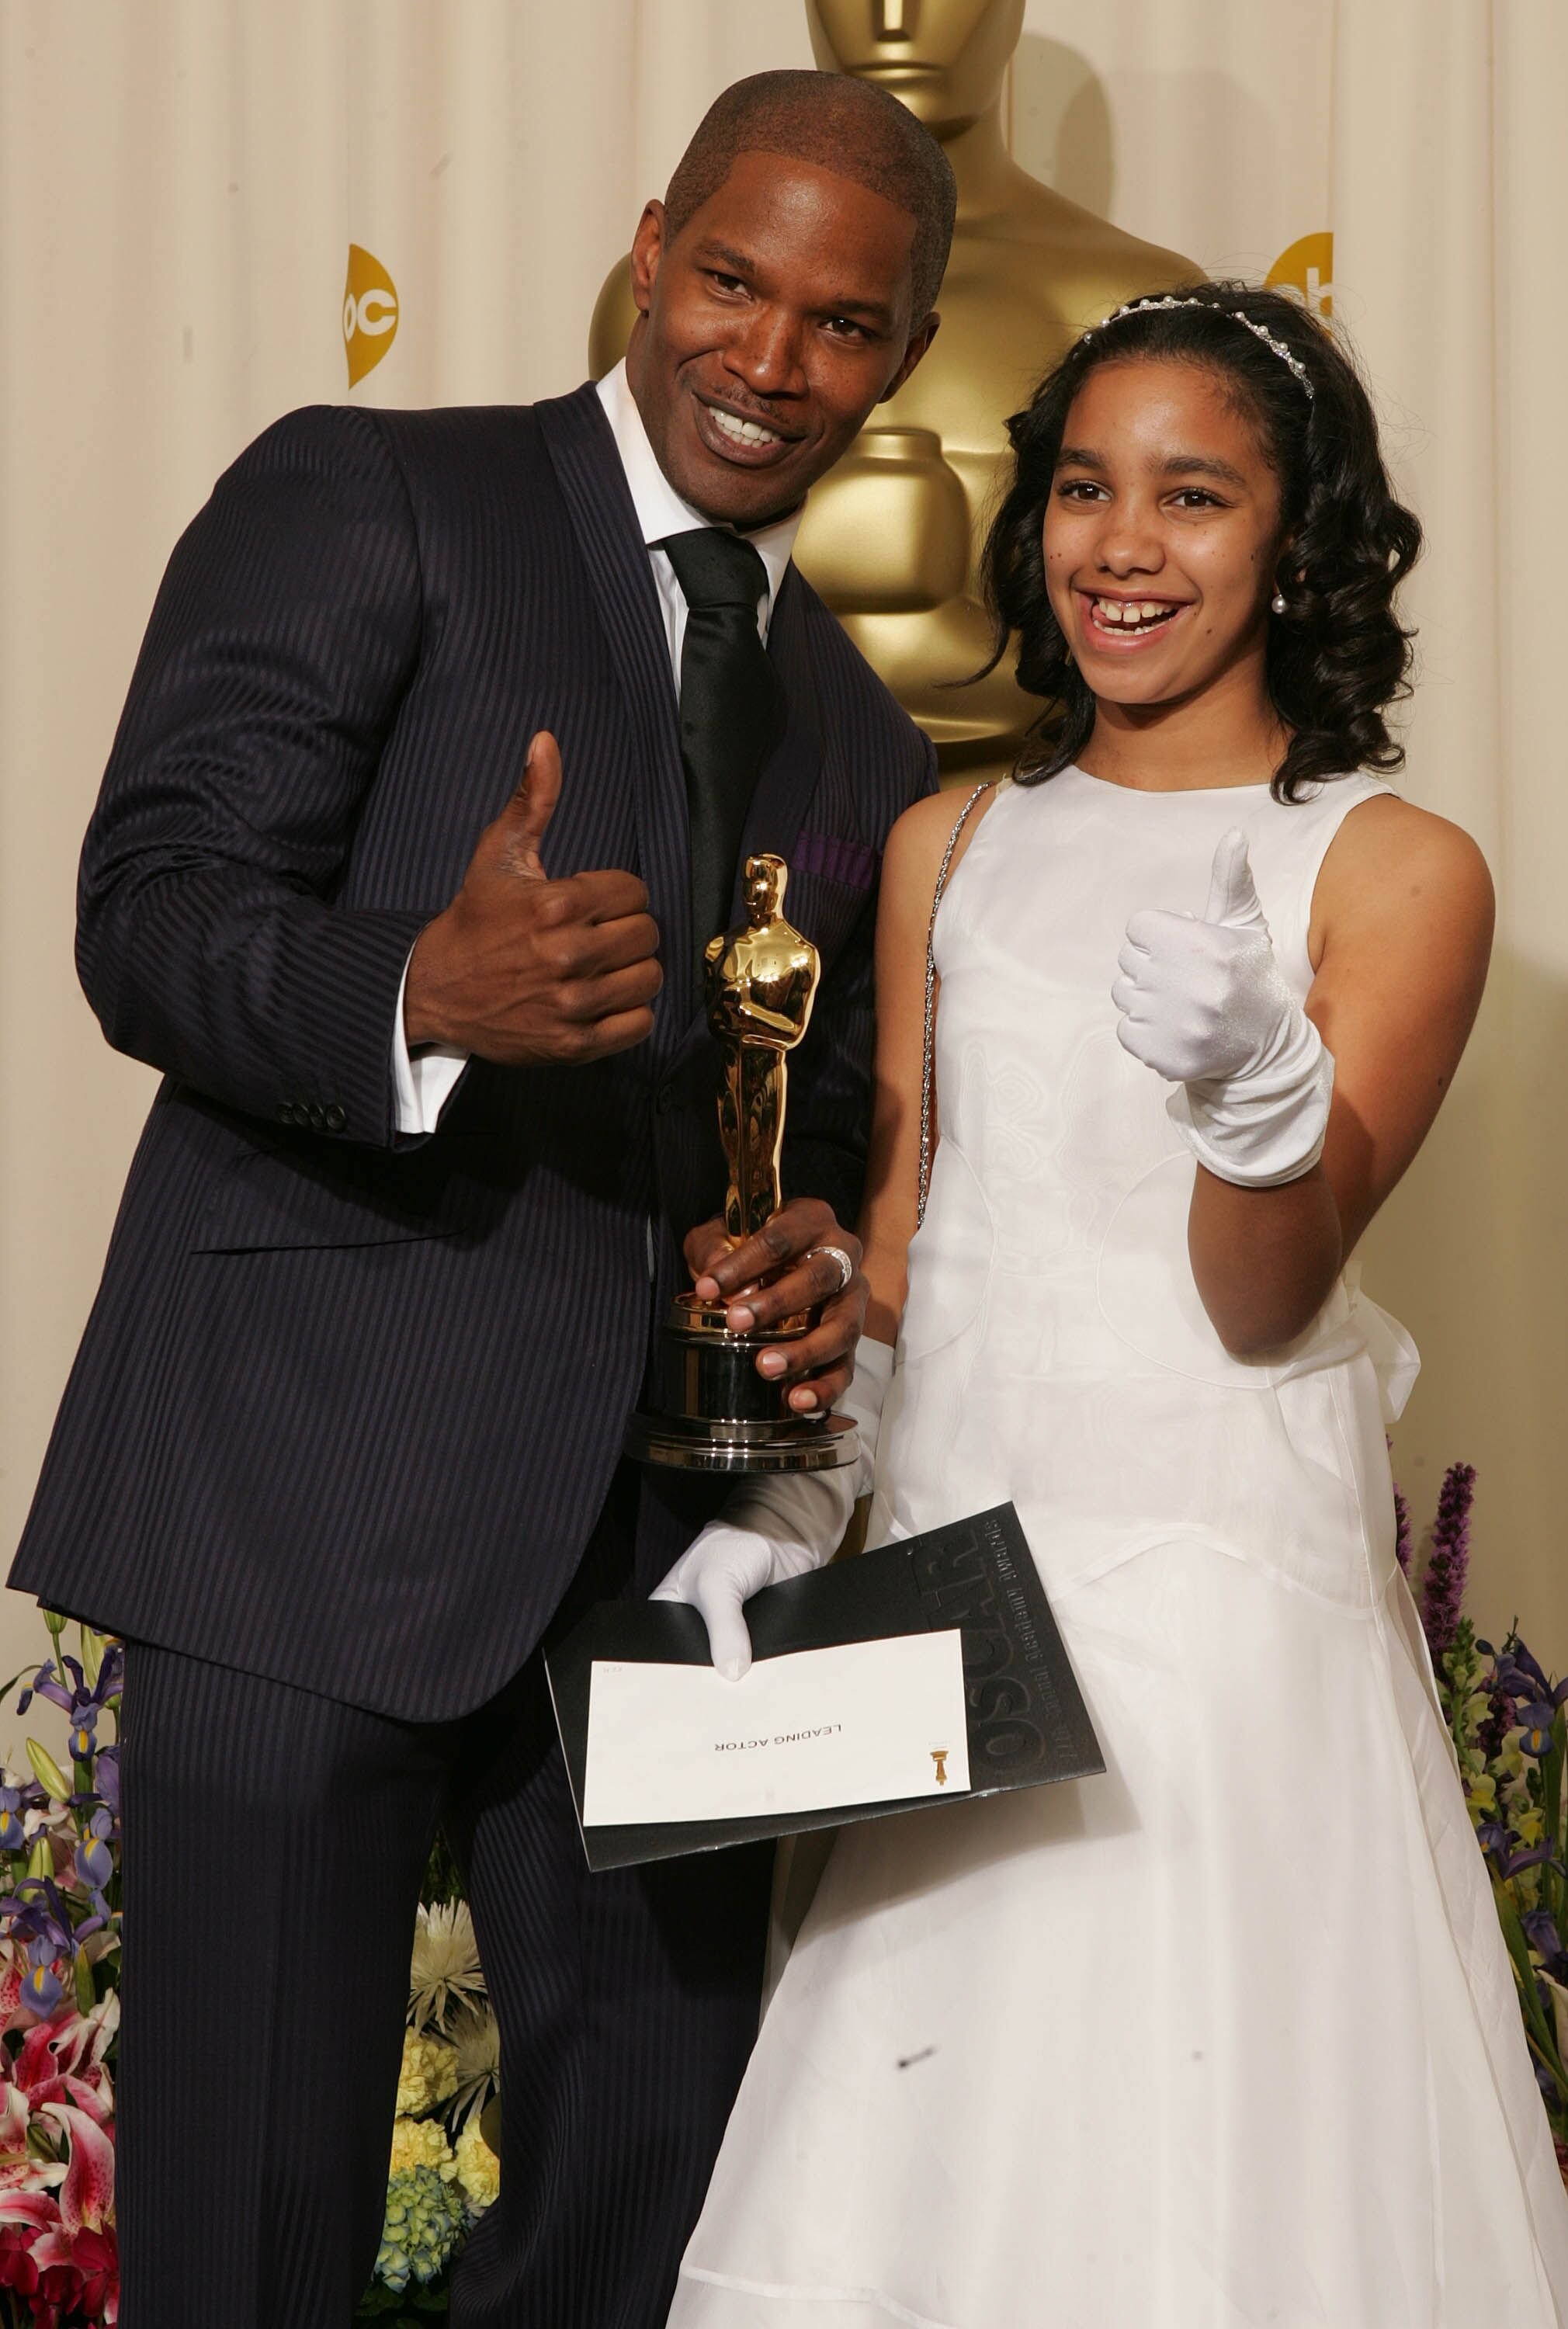 Jamie Foxx poses with his "Best Actor in a Leading Role" award for "Ray" with his daughter Corrine Marie Foxx backstage during the 77th Annual Academy Awards in 2005 | Getty Images